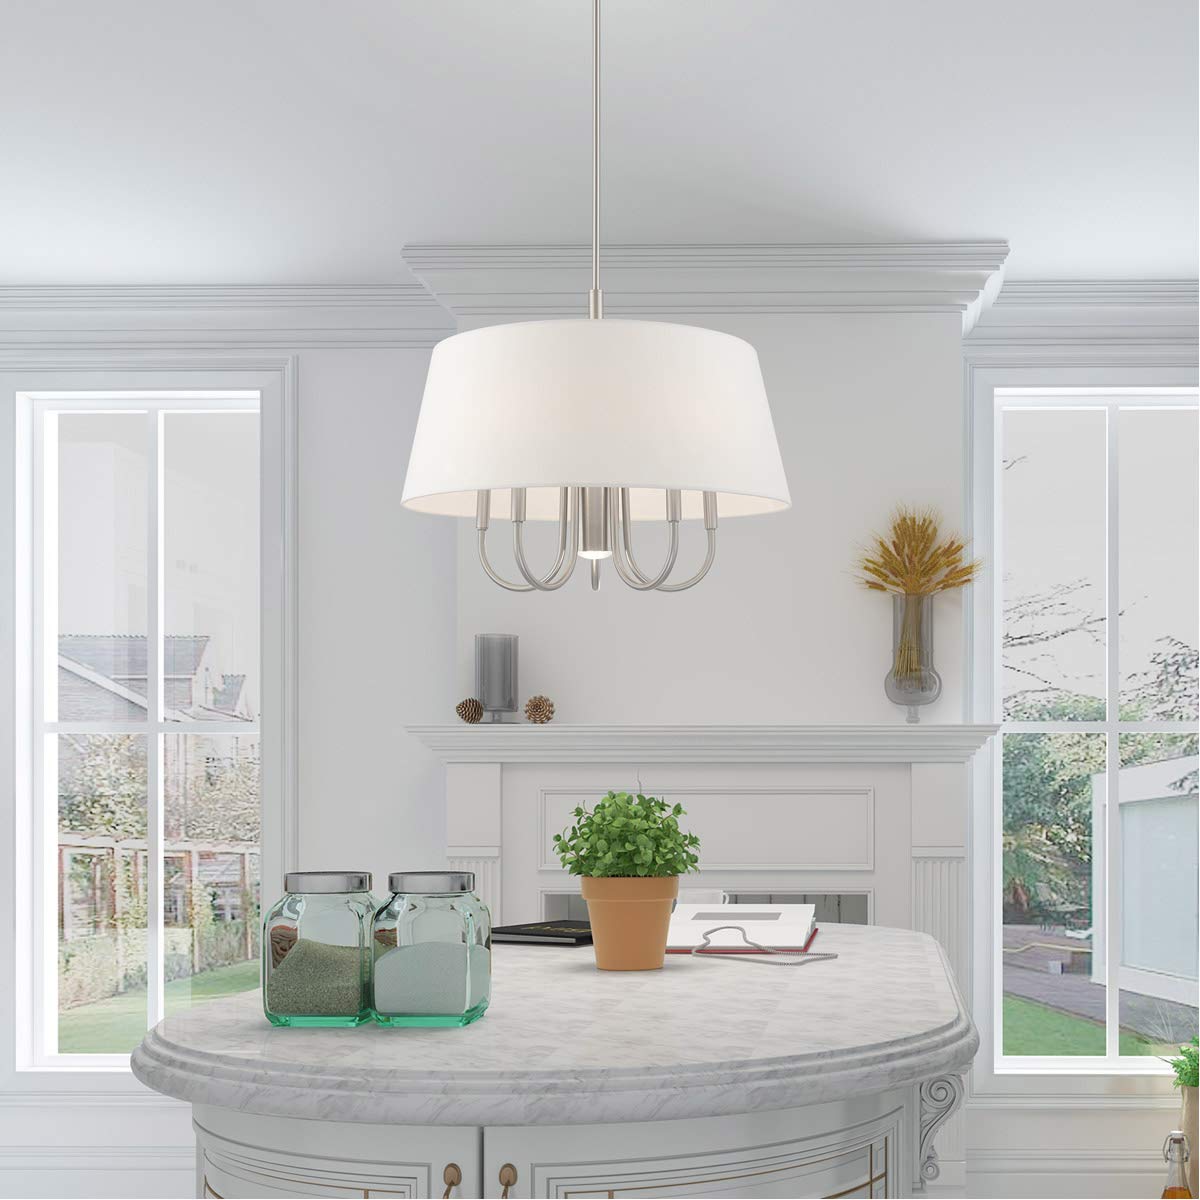 Livex Lighting 41315-91 Belclaire - Six Light Chandelier, Brushed Nickel Finish with Off-White Fabric Shade